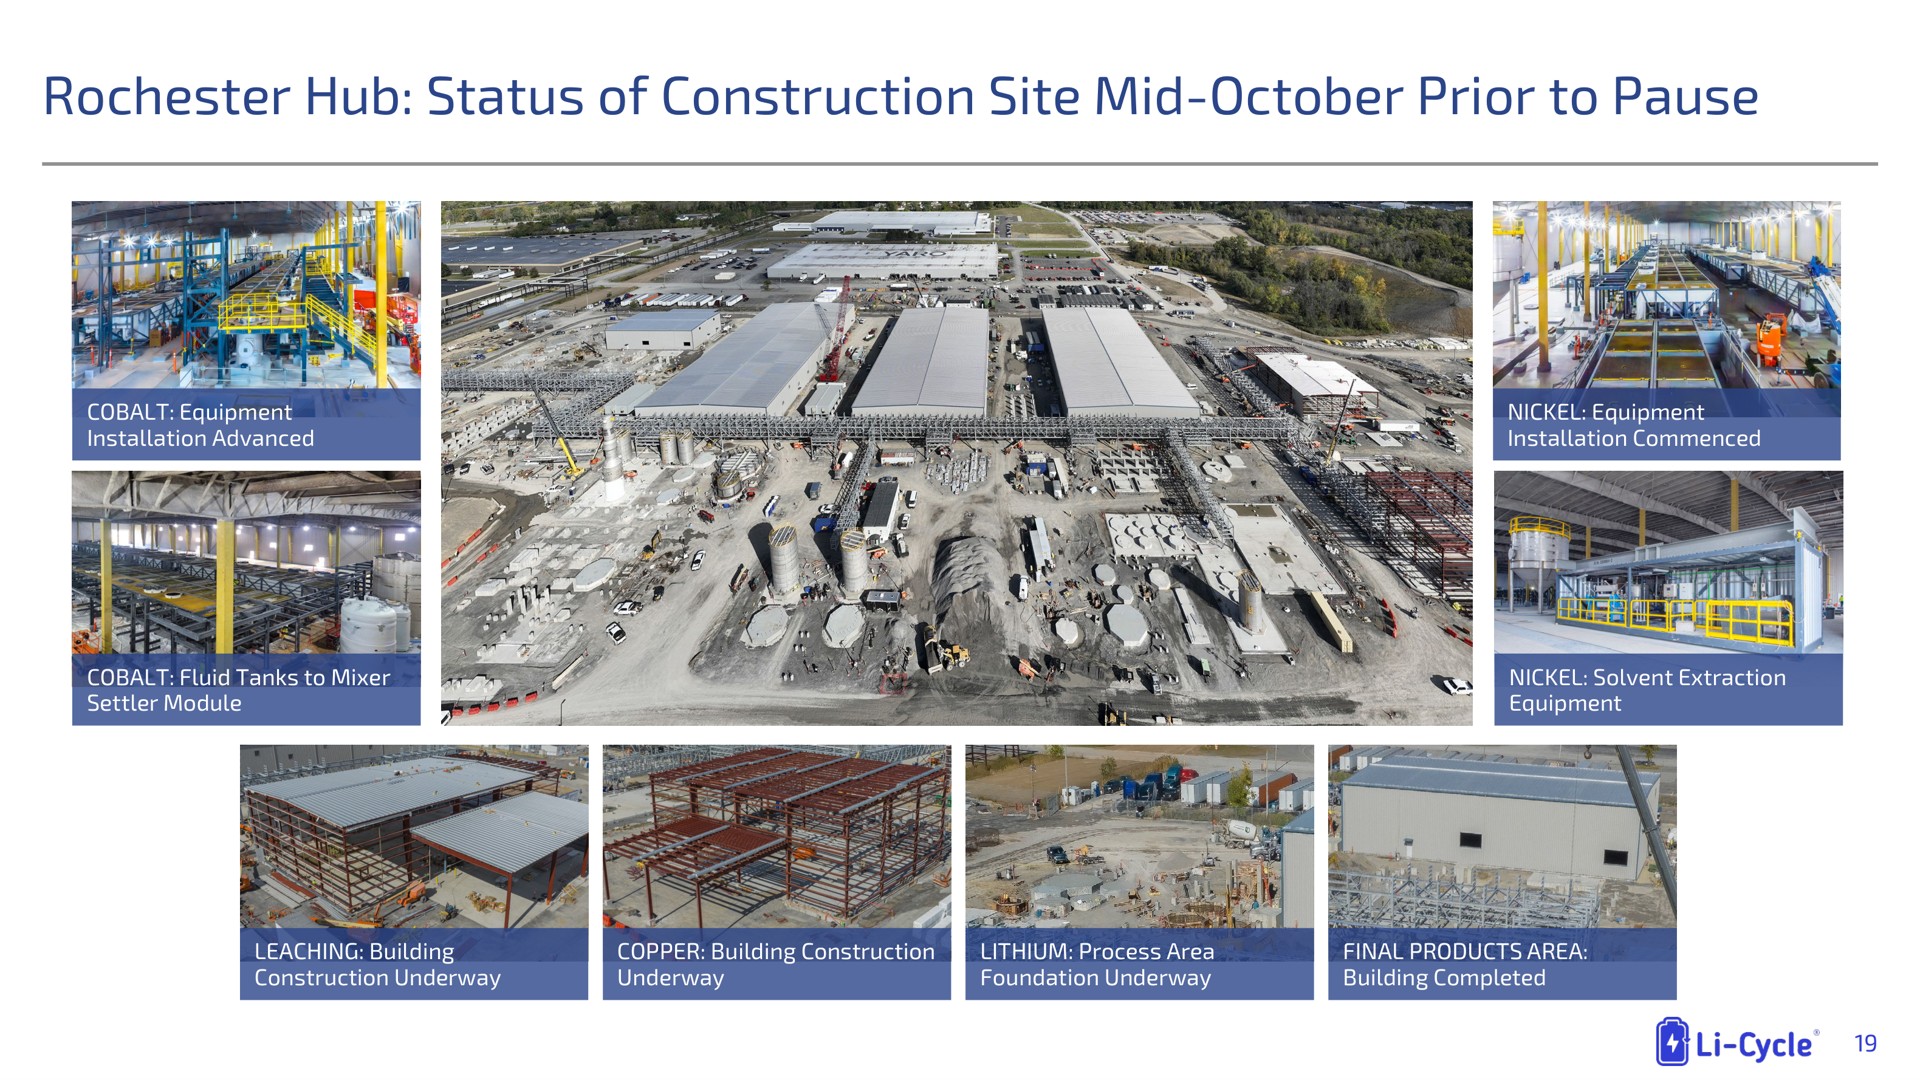 hub status of construction site mid prior to pause | Li-Cycle